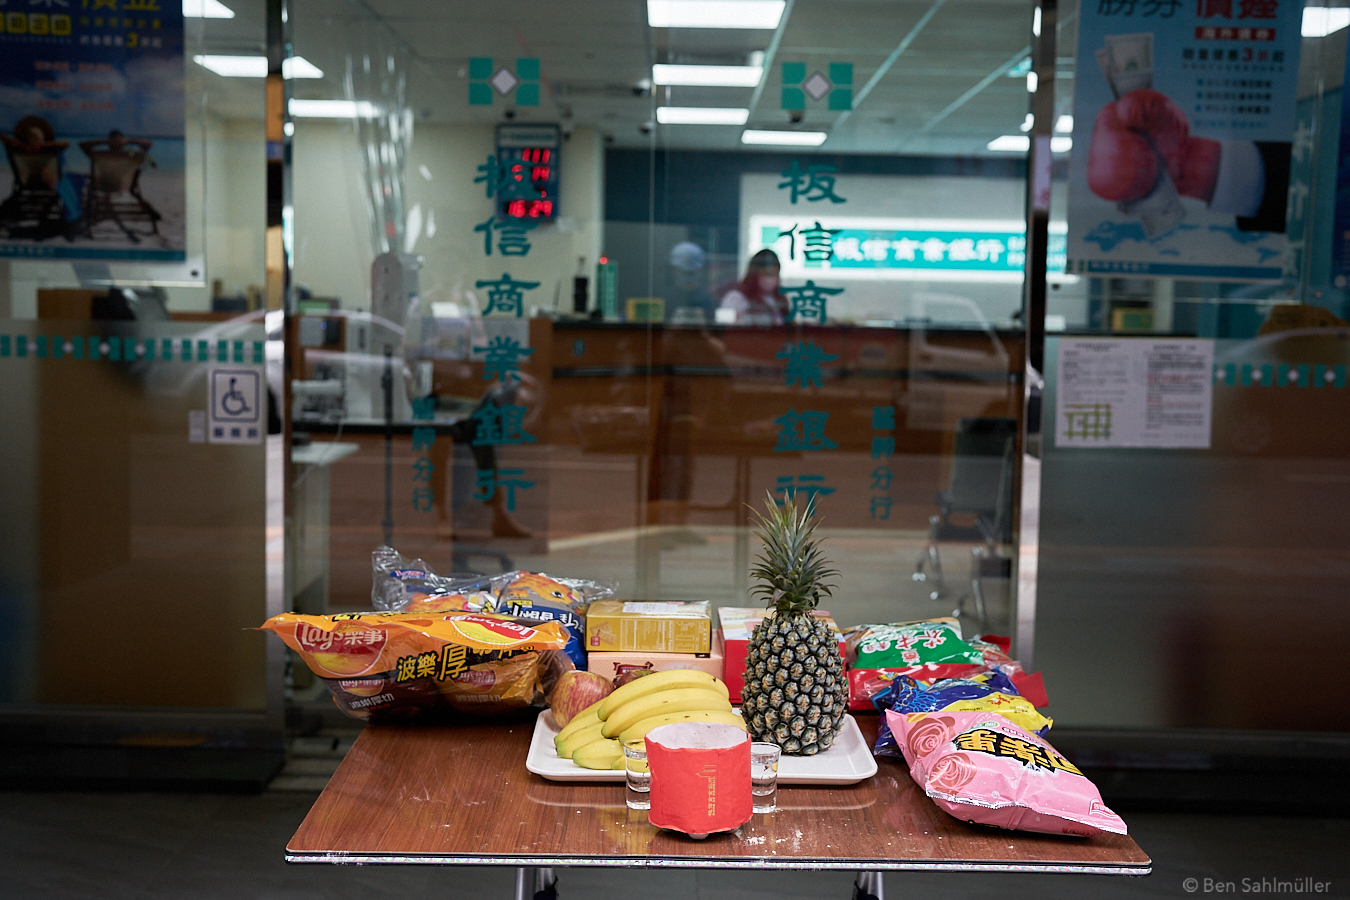 A small table with some food offerings in front of a small bank.